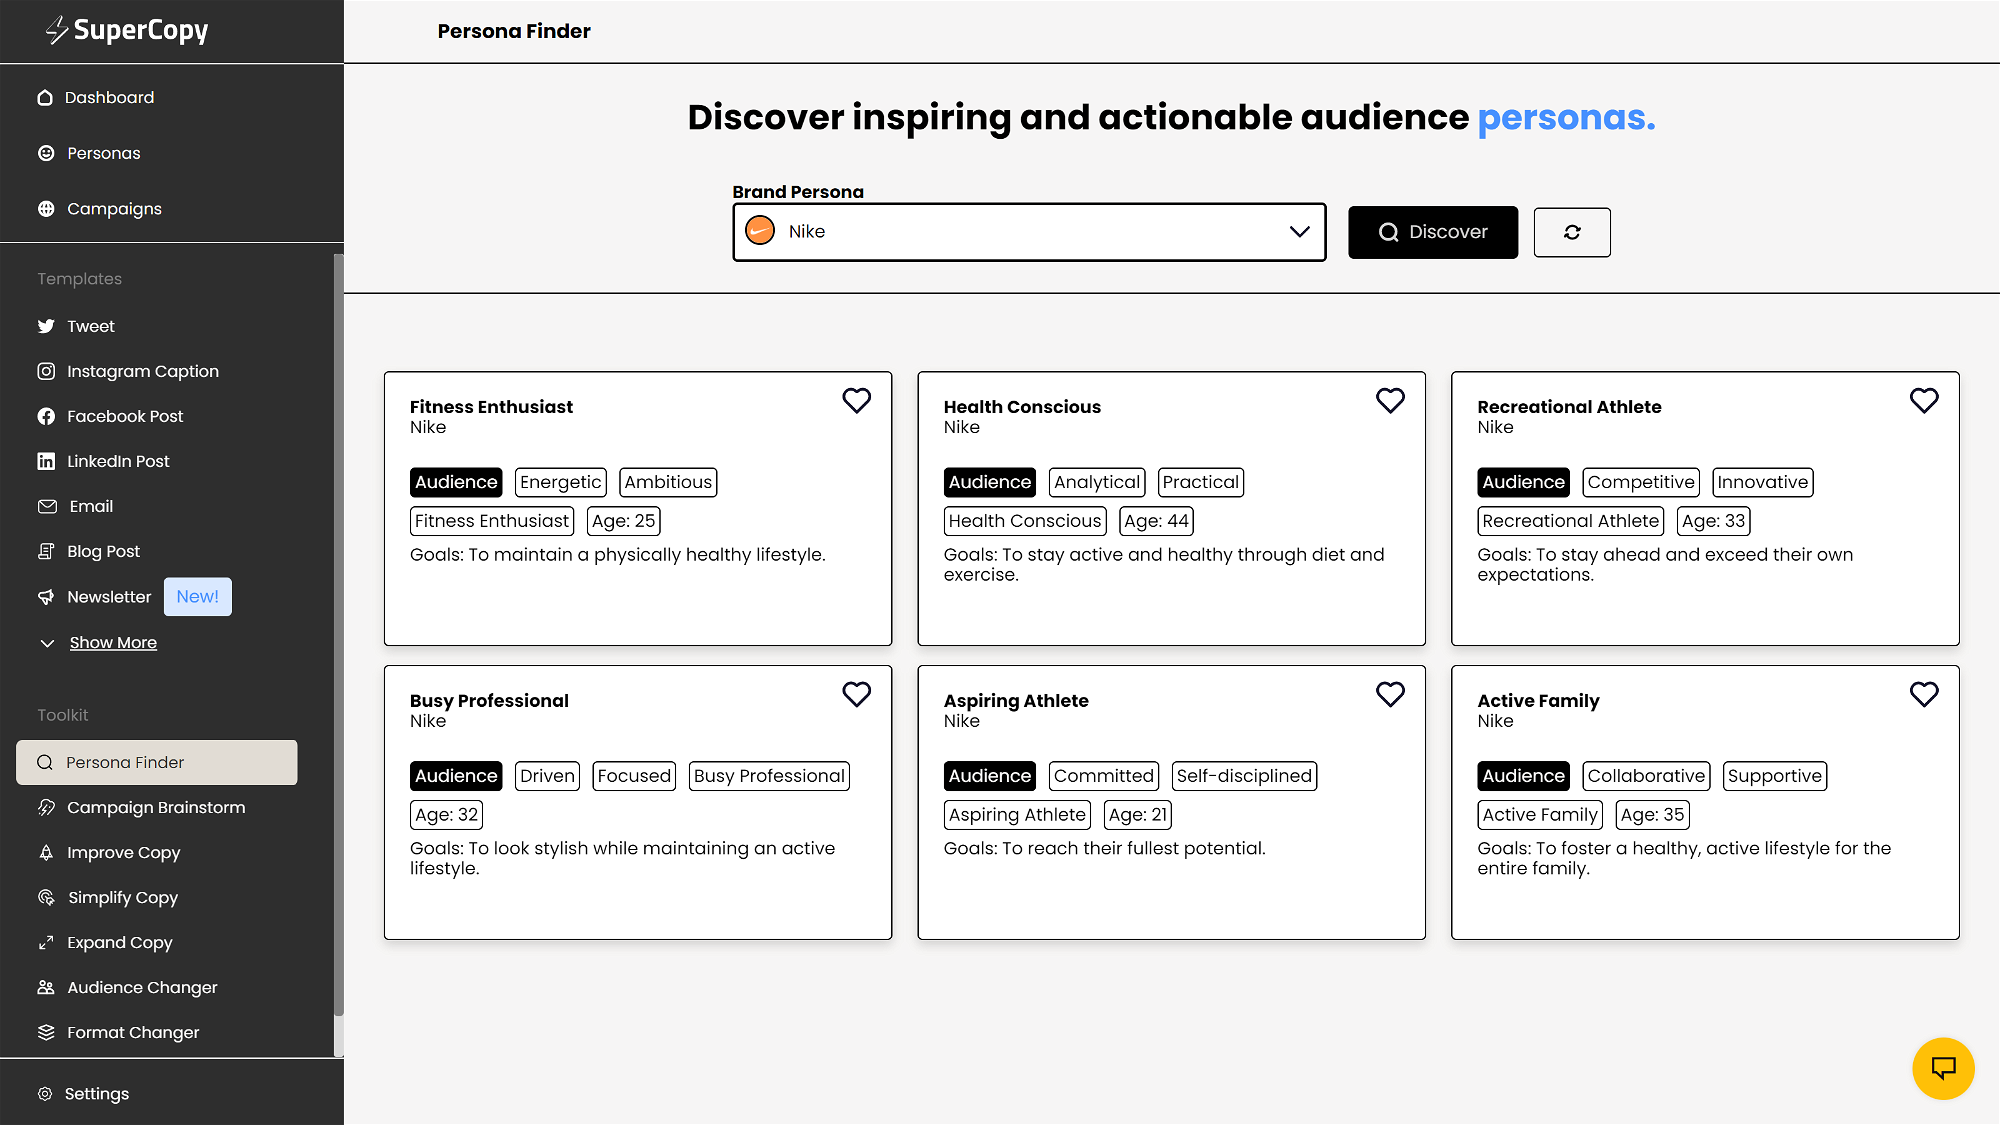 Find audience personas